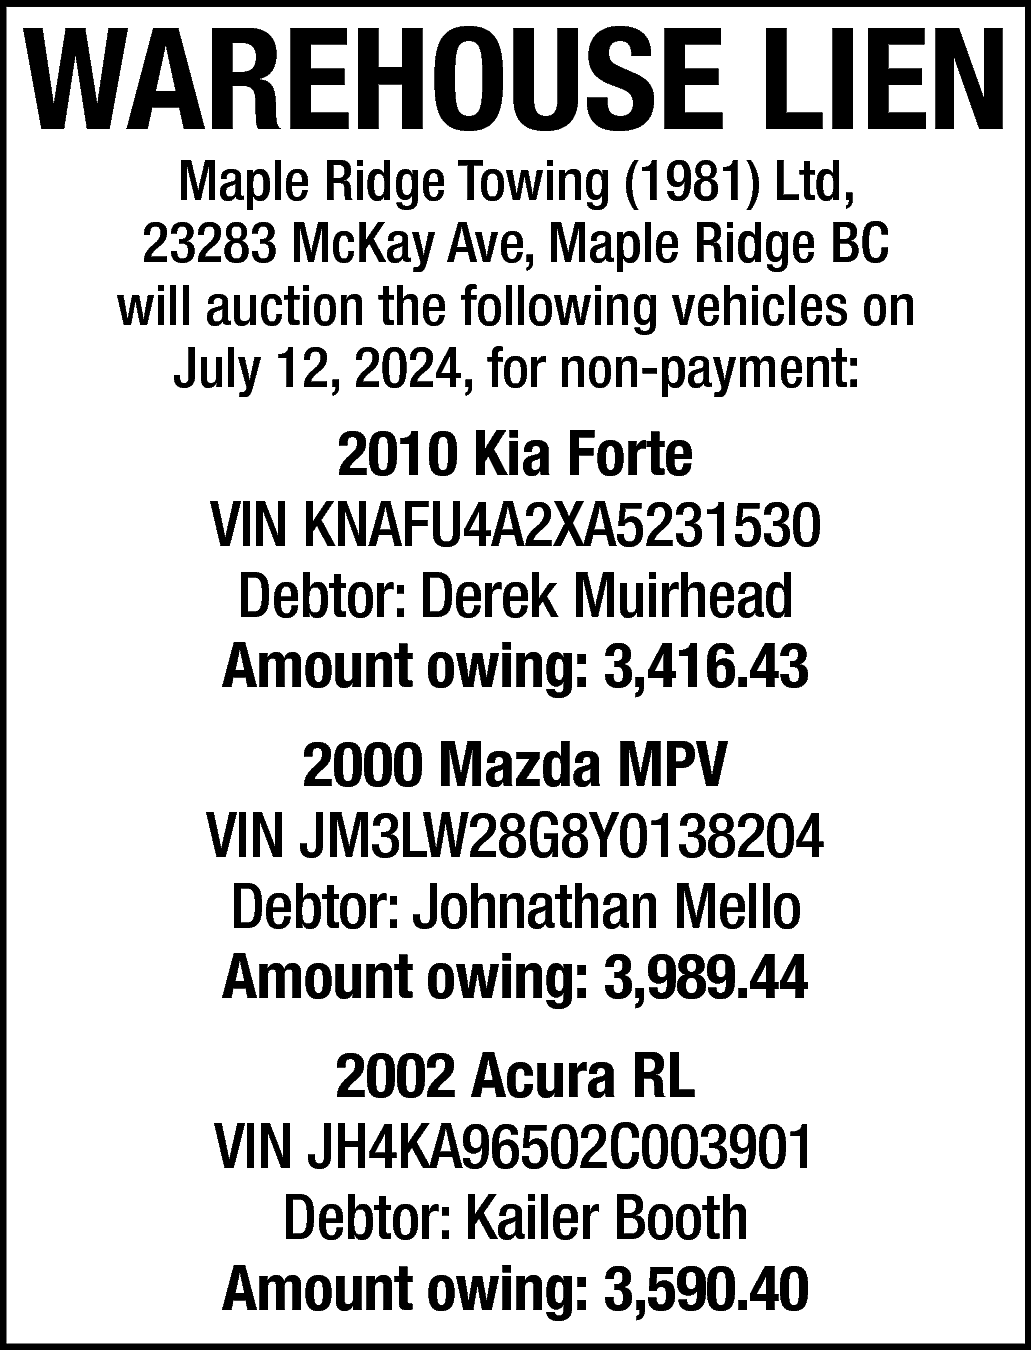 WAREHOUSE LIEN <br>Maple Ridge Towing  WAREHOUSE LIEN  Maple Ridge Towing (1981) Ltd,  23283 McKay Ave, Maple Ridge BC  will auction the following vehicles on  July 12, 2024, for non-payment:    2010 Kia Forte  VIN KNAFU4A2XA5231530  Debtor: Derek Muirhead  Amount owing: 3,416.43  2000 Mazda MPV  VIN JM3LW28G8Y0138204  Debtor: Johnathan Mello  Amount owing: 3,989.44  2002 Acura RL  VIN JH4KA96502C003901  Debtor: Kailer Booth  Amount owing: 3,590.40    